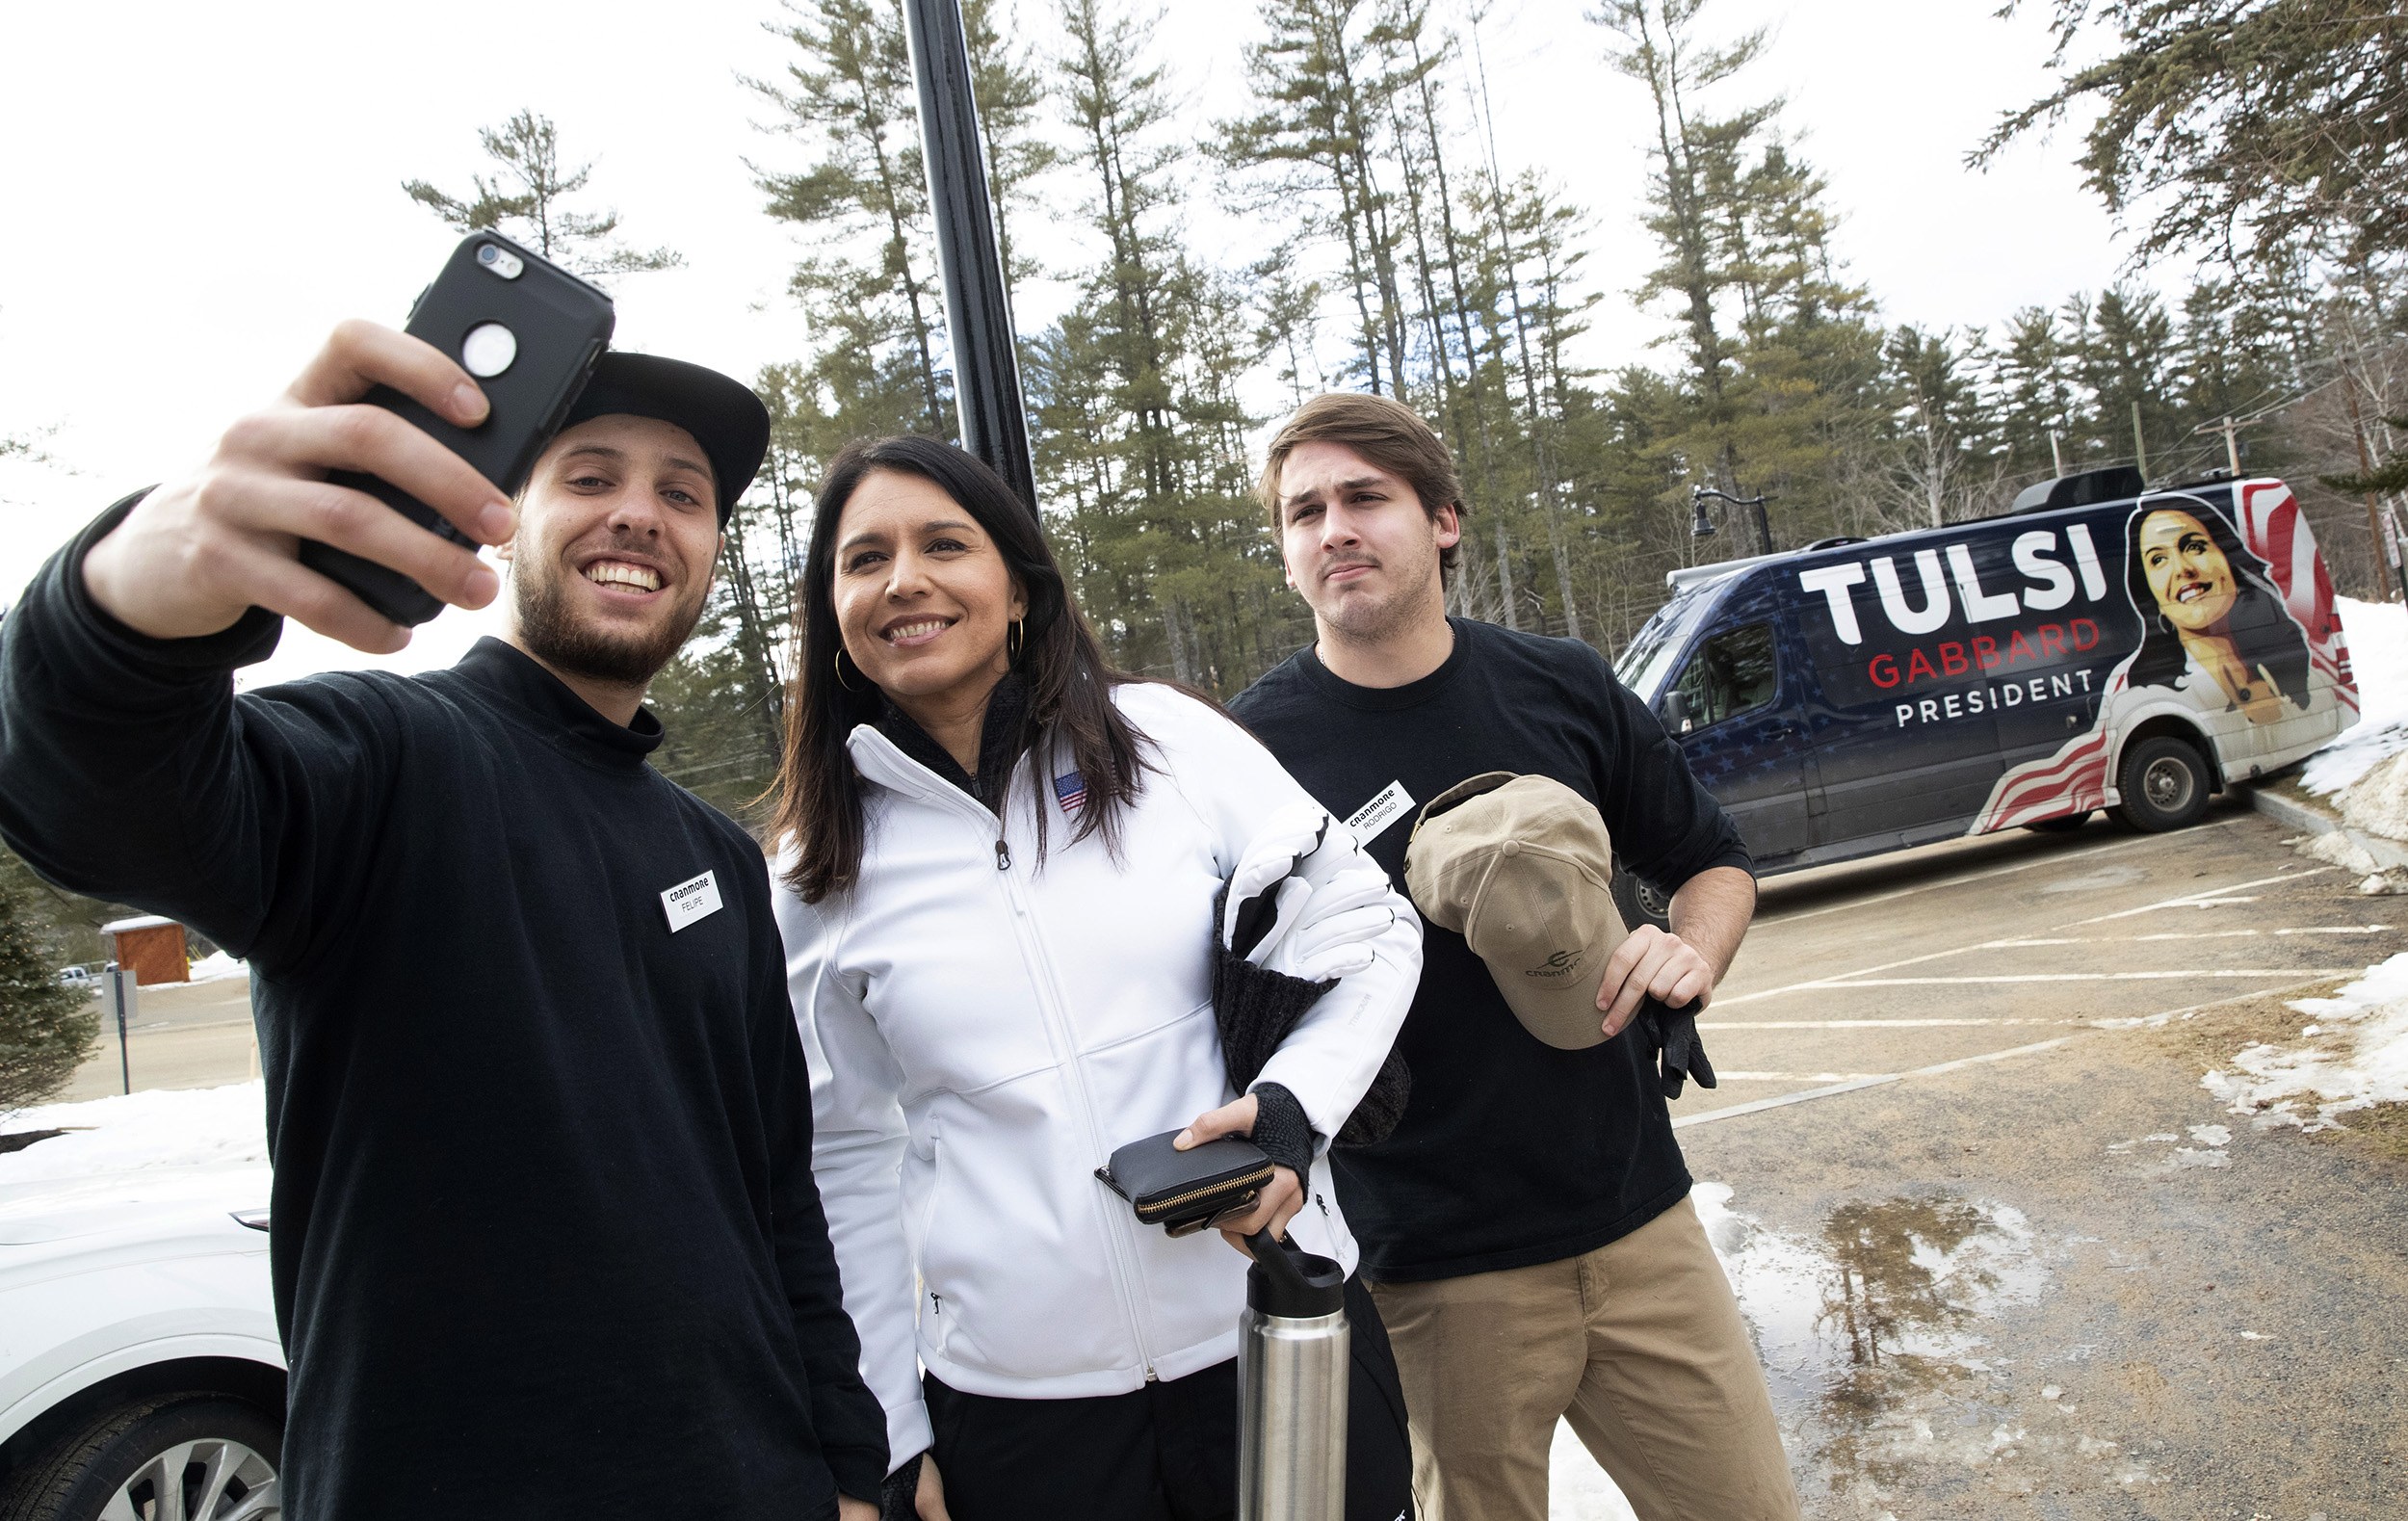 Rep. Tulsi Gabbard snowboards with New Hampshire supporters | Honolulu Star-Advertiser2500 x 1579